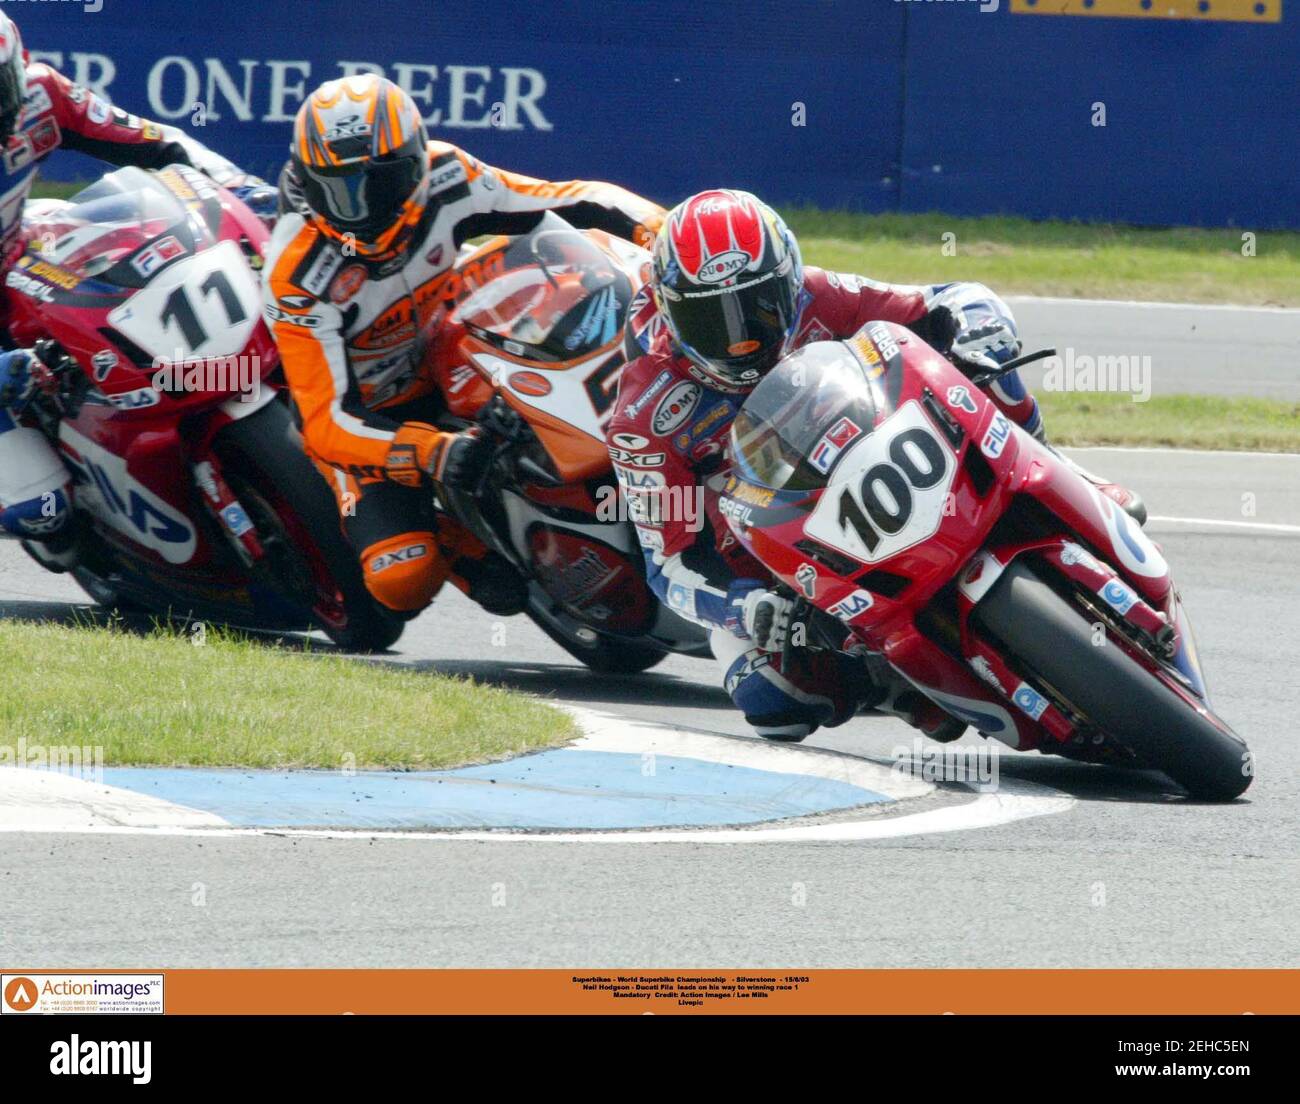 Superbikes - World Superbike Championship - Silverstone - 15/6/03 Neil  Hodgson - Ducati Fila leads on his way to winning race 1 Mandatory Credit:  Action Images / Lee Mills Livepic Stock Photo - Alamy